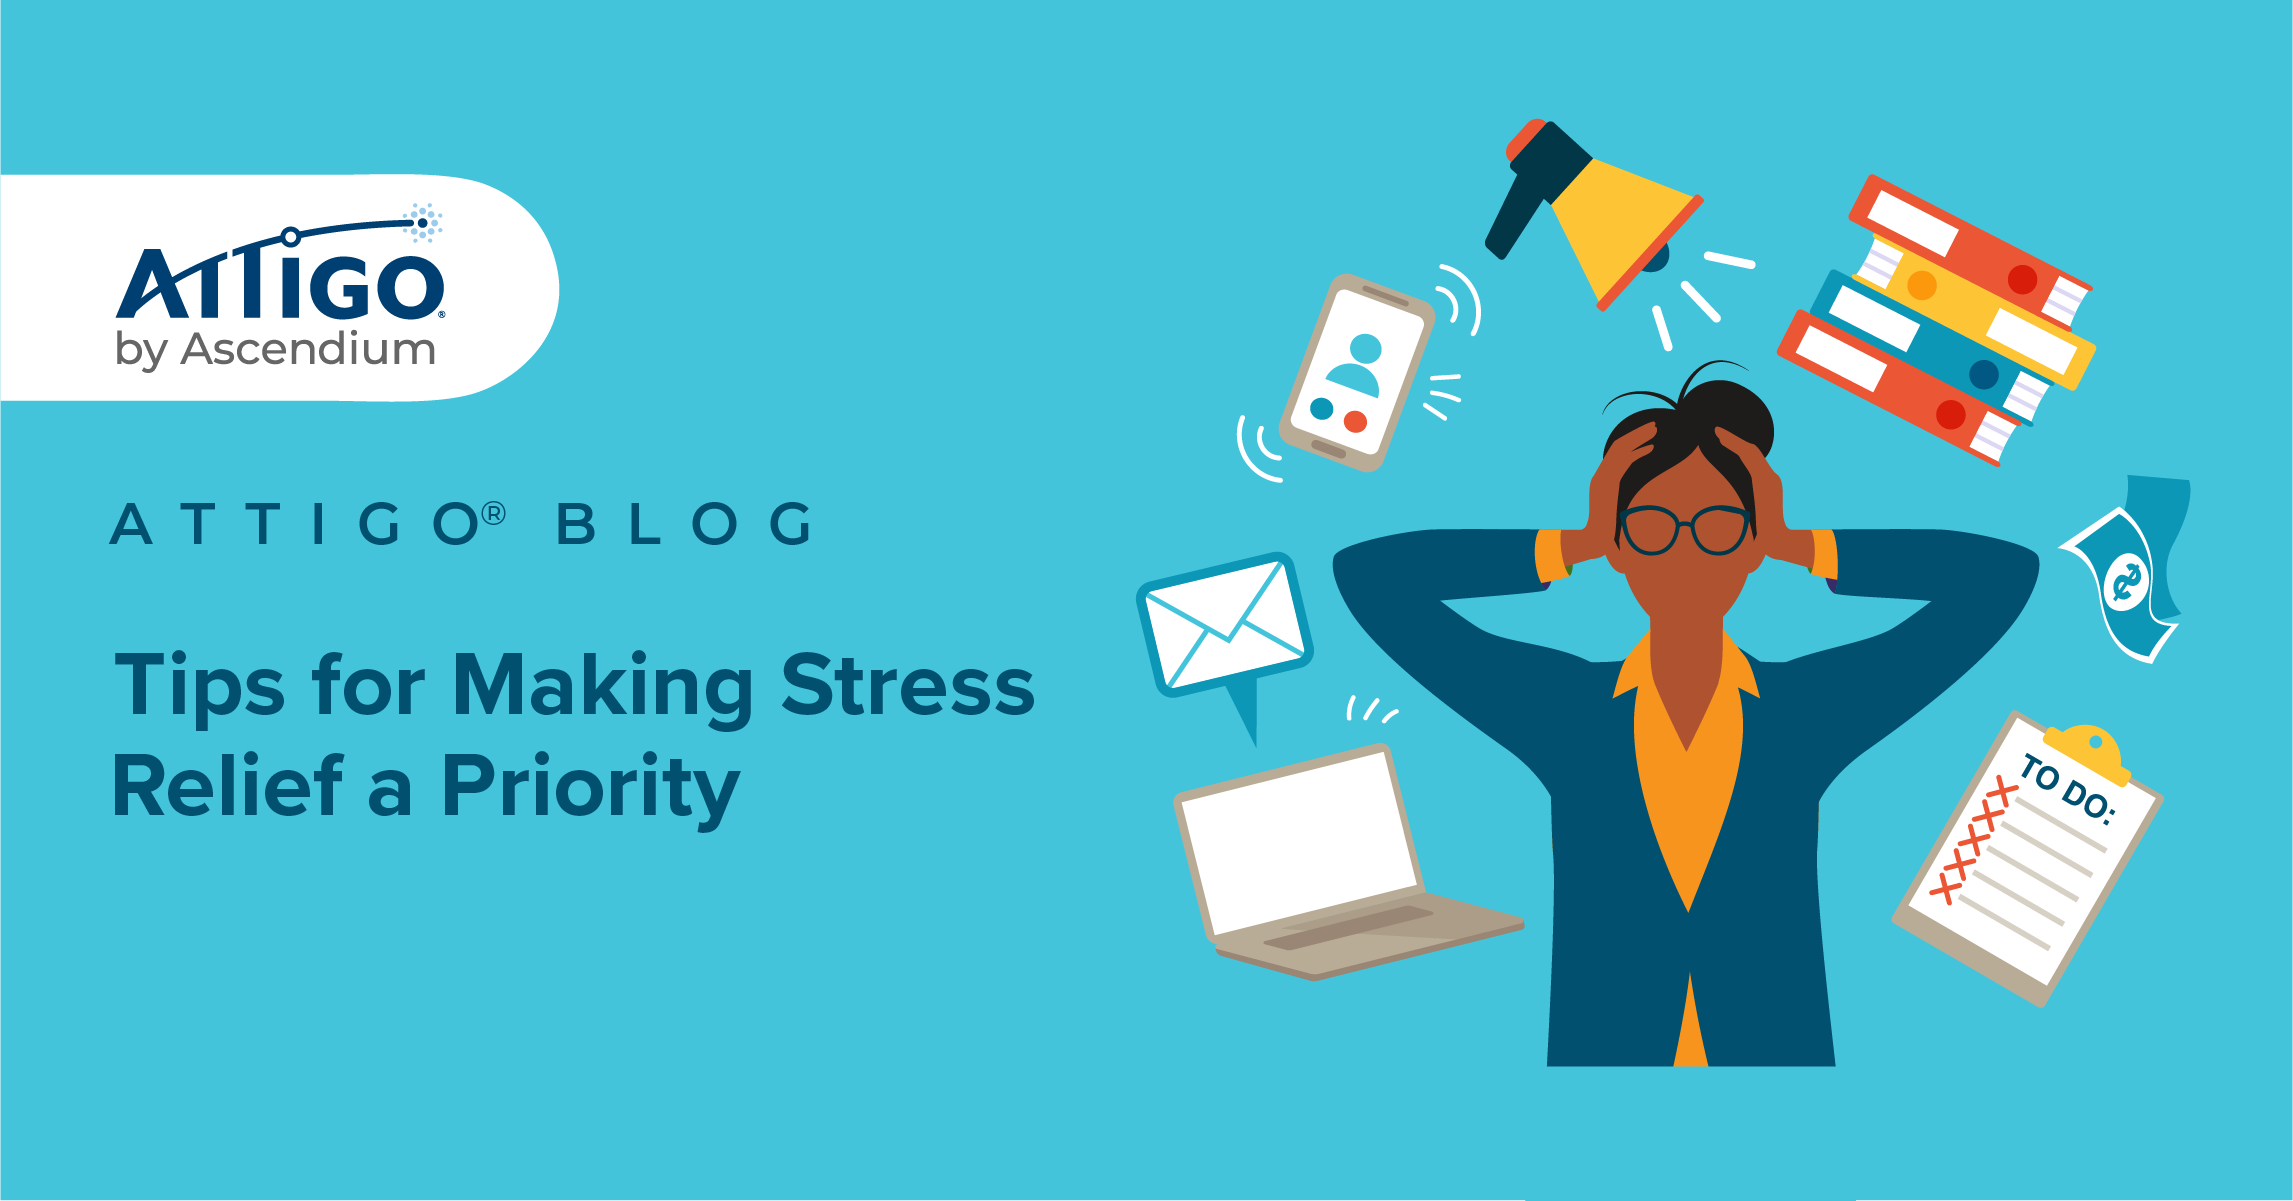 Tips for making stress relief a priority